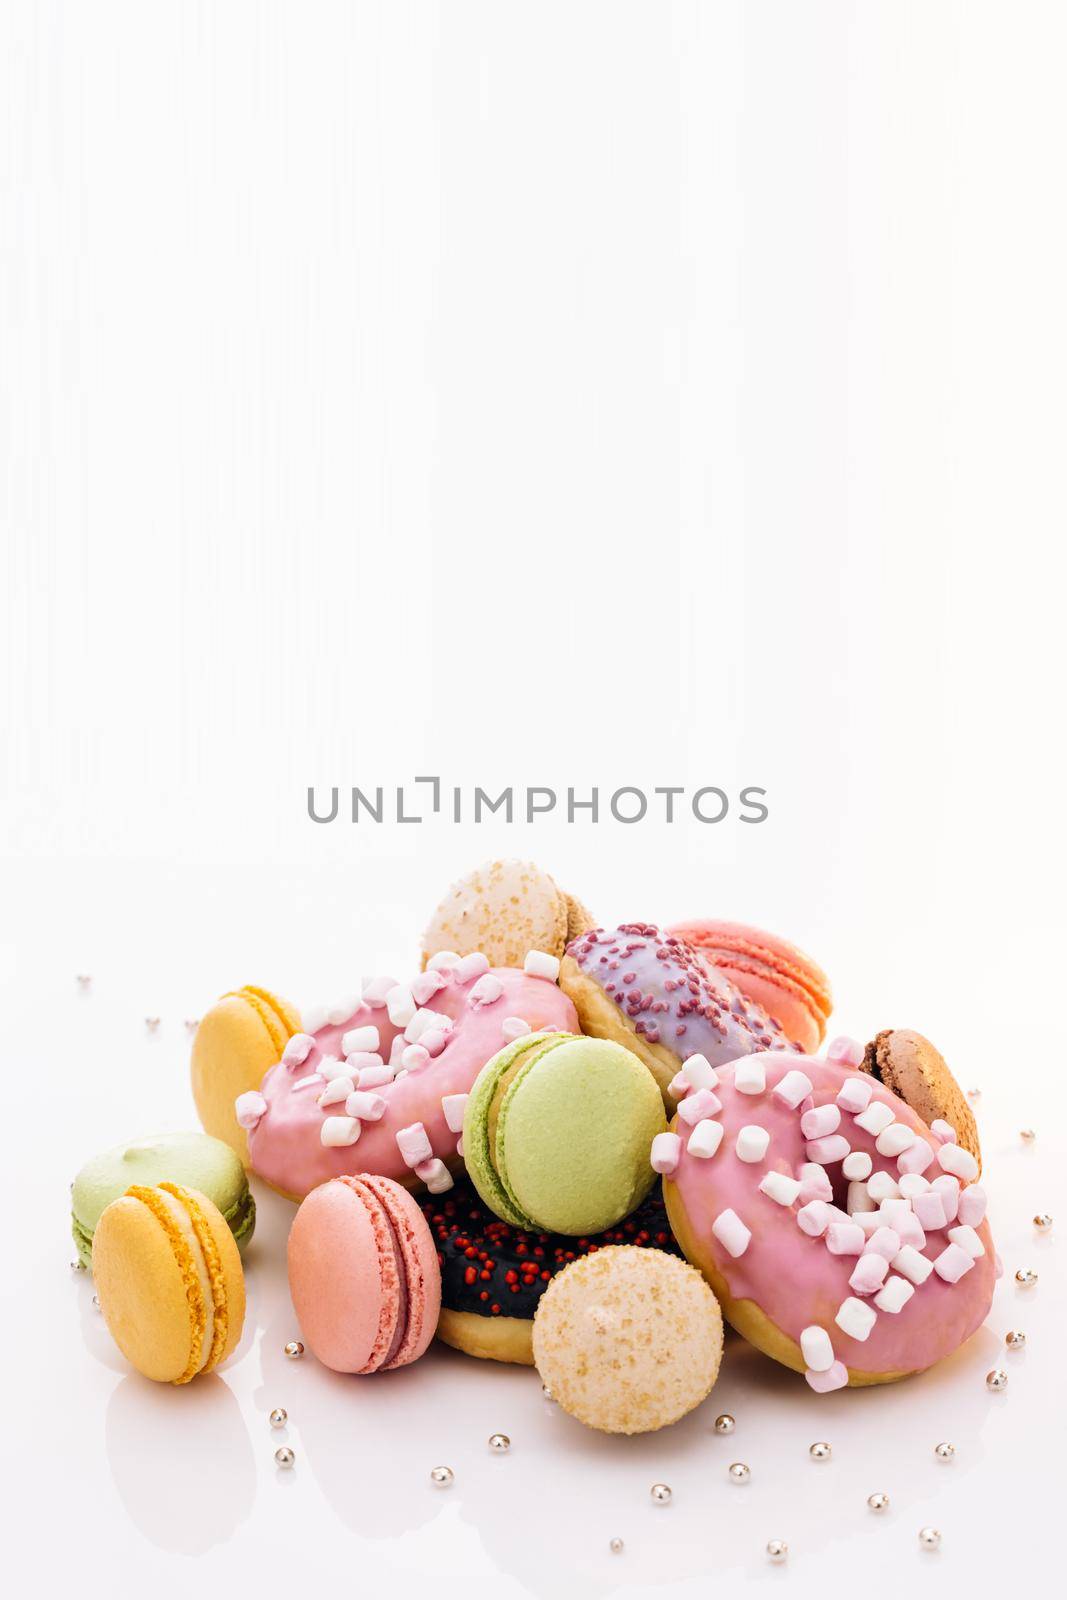 Many multi-colored macarons donuts with different tastes, dessert. Macaroons and donuts on a white background. French macaroons.